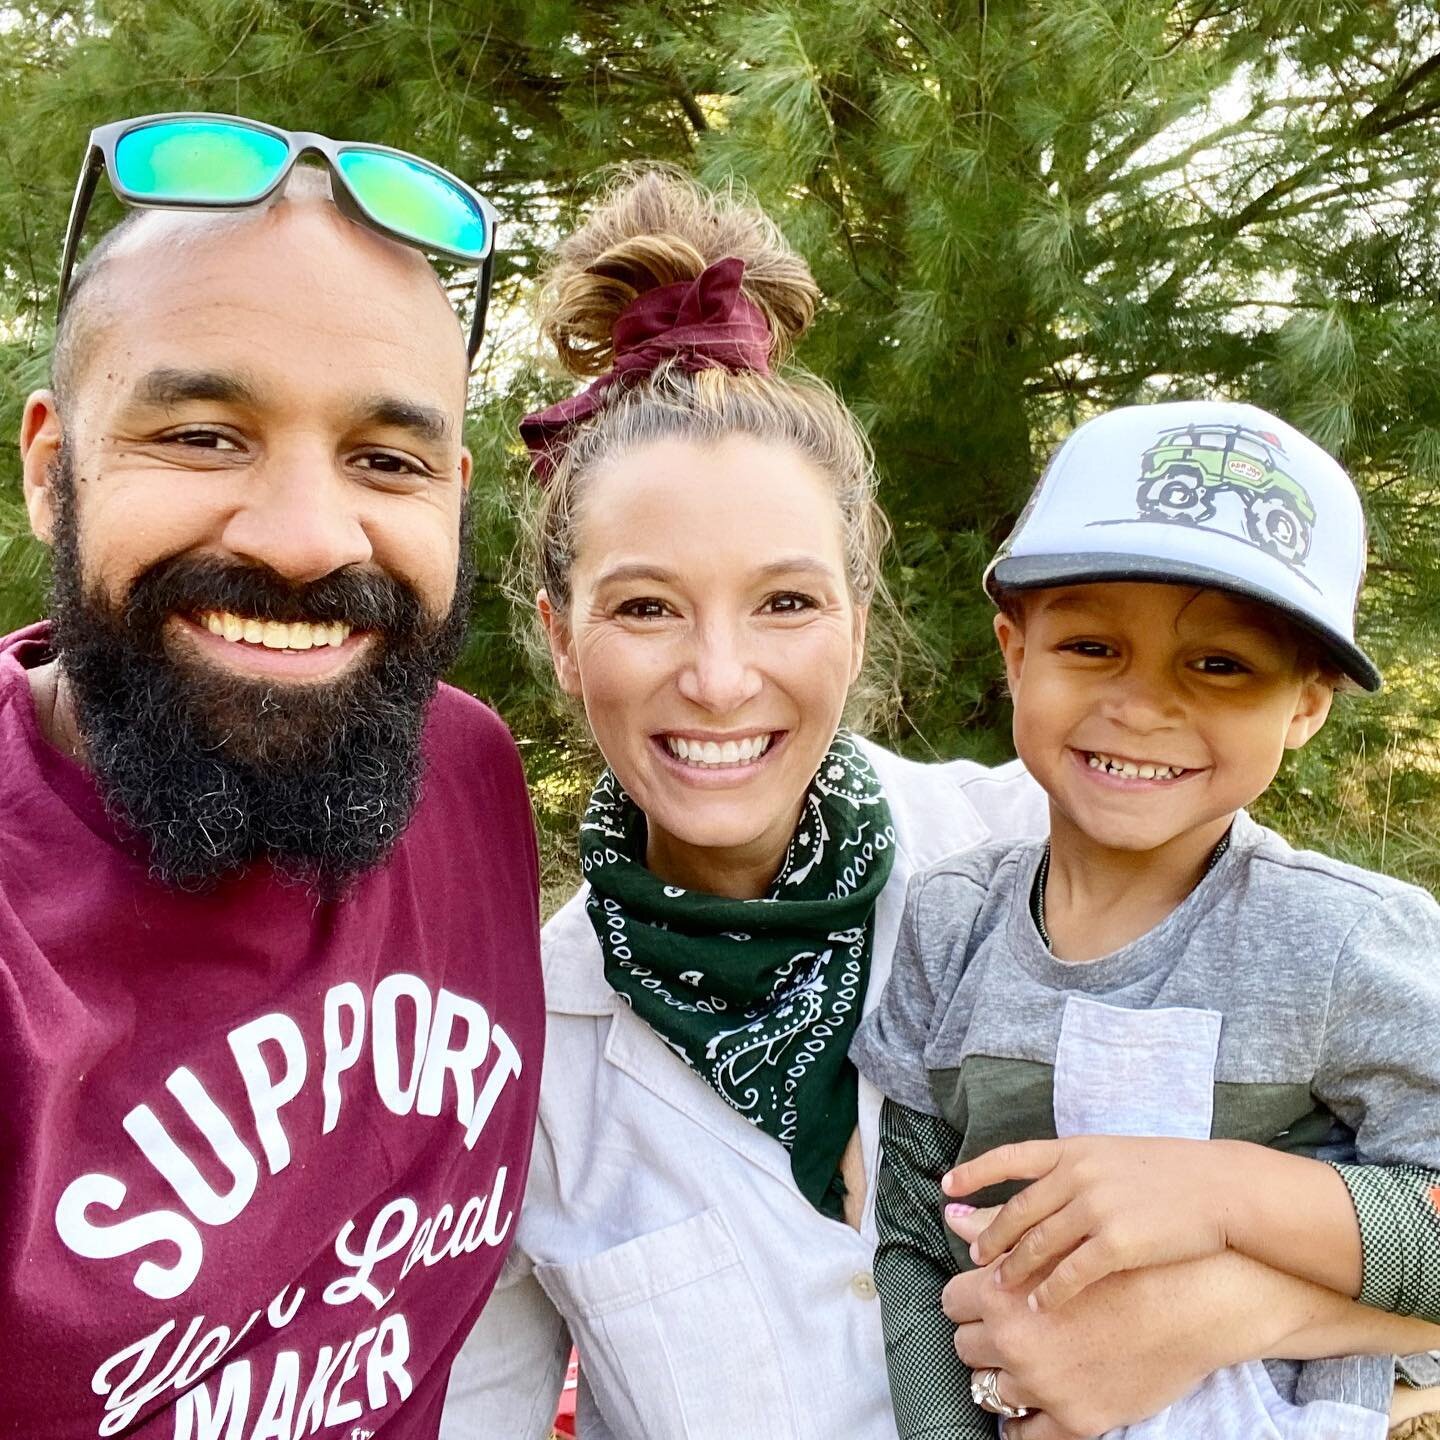 First Day of Fall! @adventurtunityfamily 

We hiked, we biked, and I even cooked the dinner!

#family #firstdayoffall #fallfashion #fall #fallweather #hiking #travelblogger #familytime #fulltimetravelfamily #pennsylvania #poconos #kadesawyer